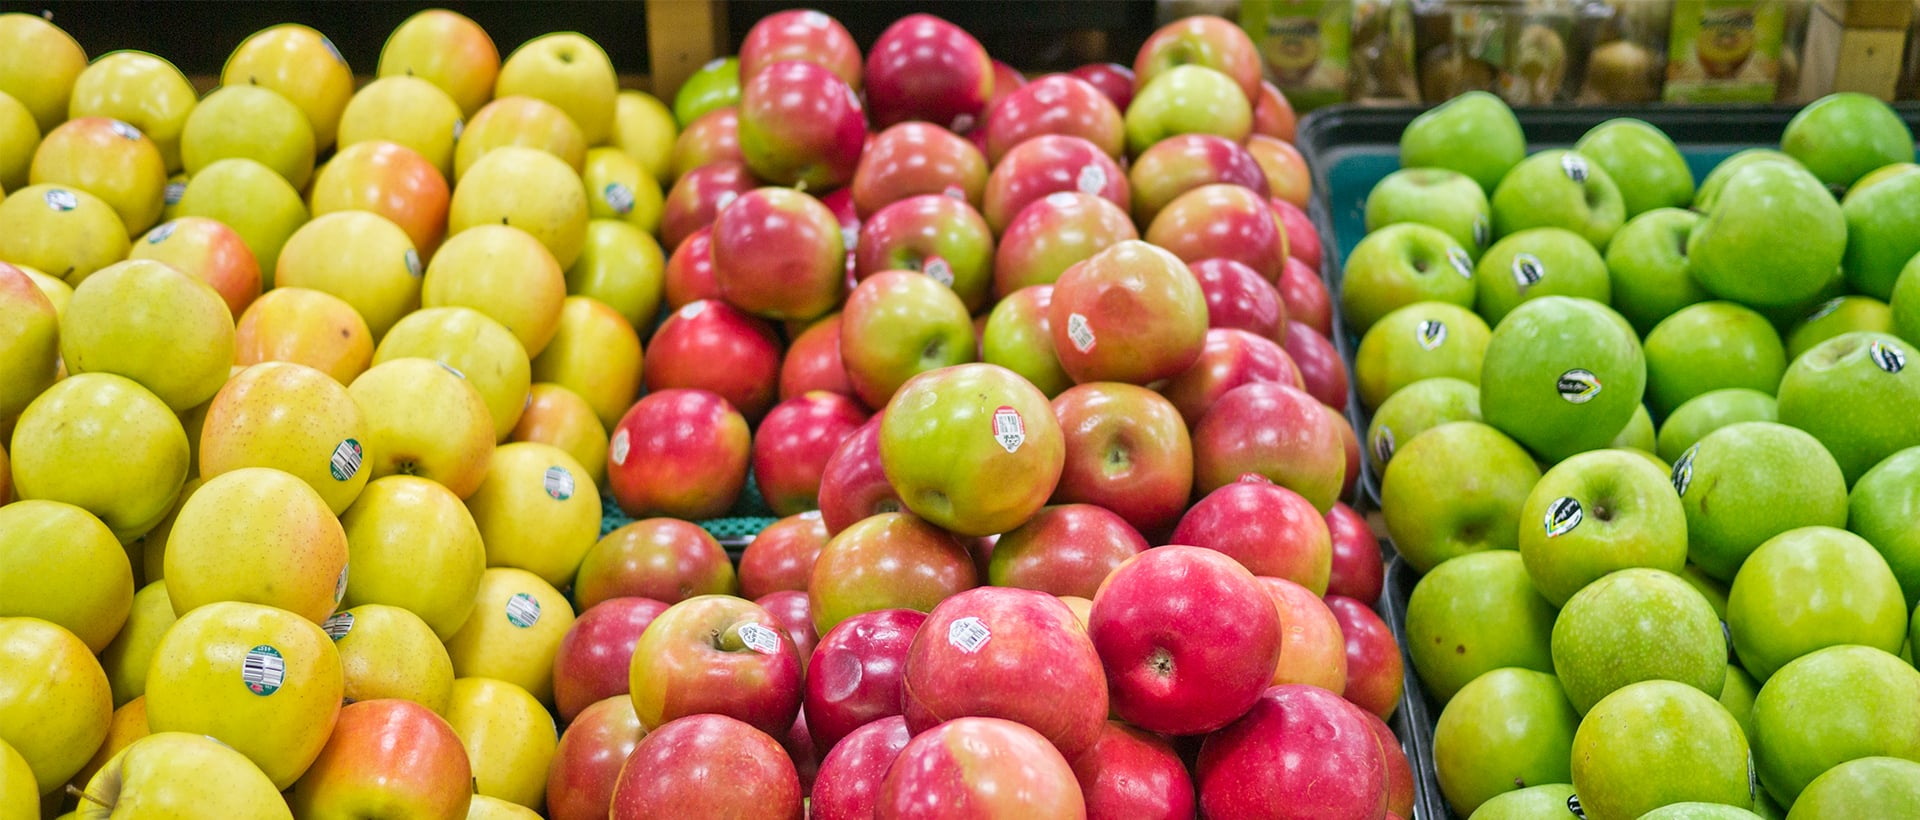 apples in a supermarket